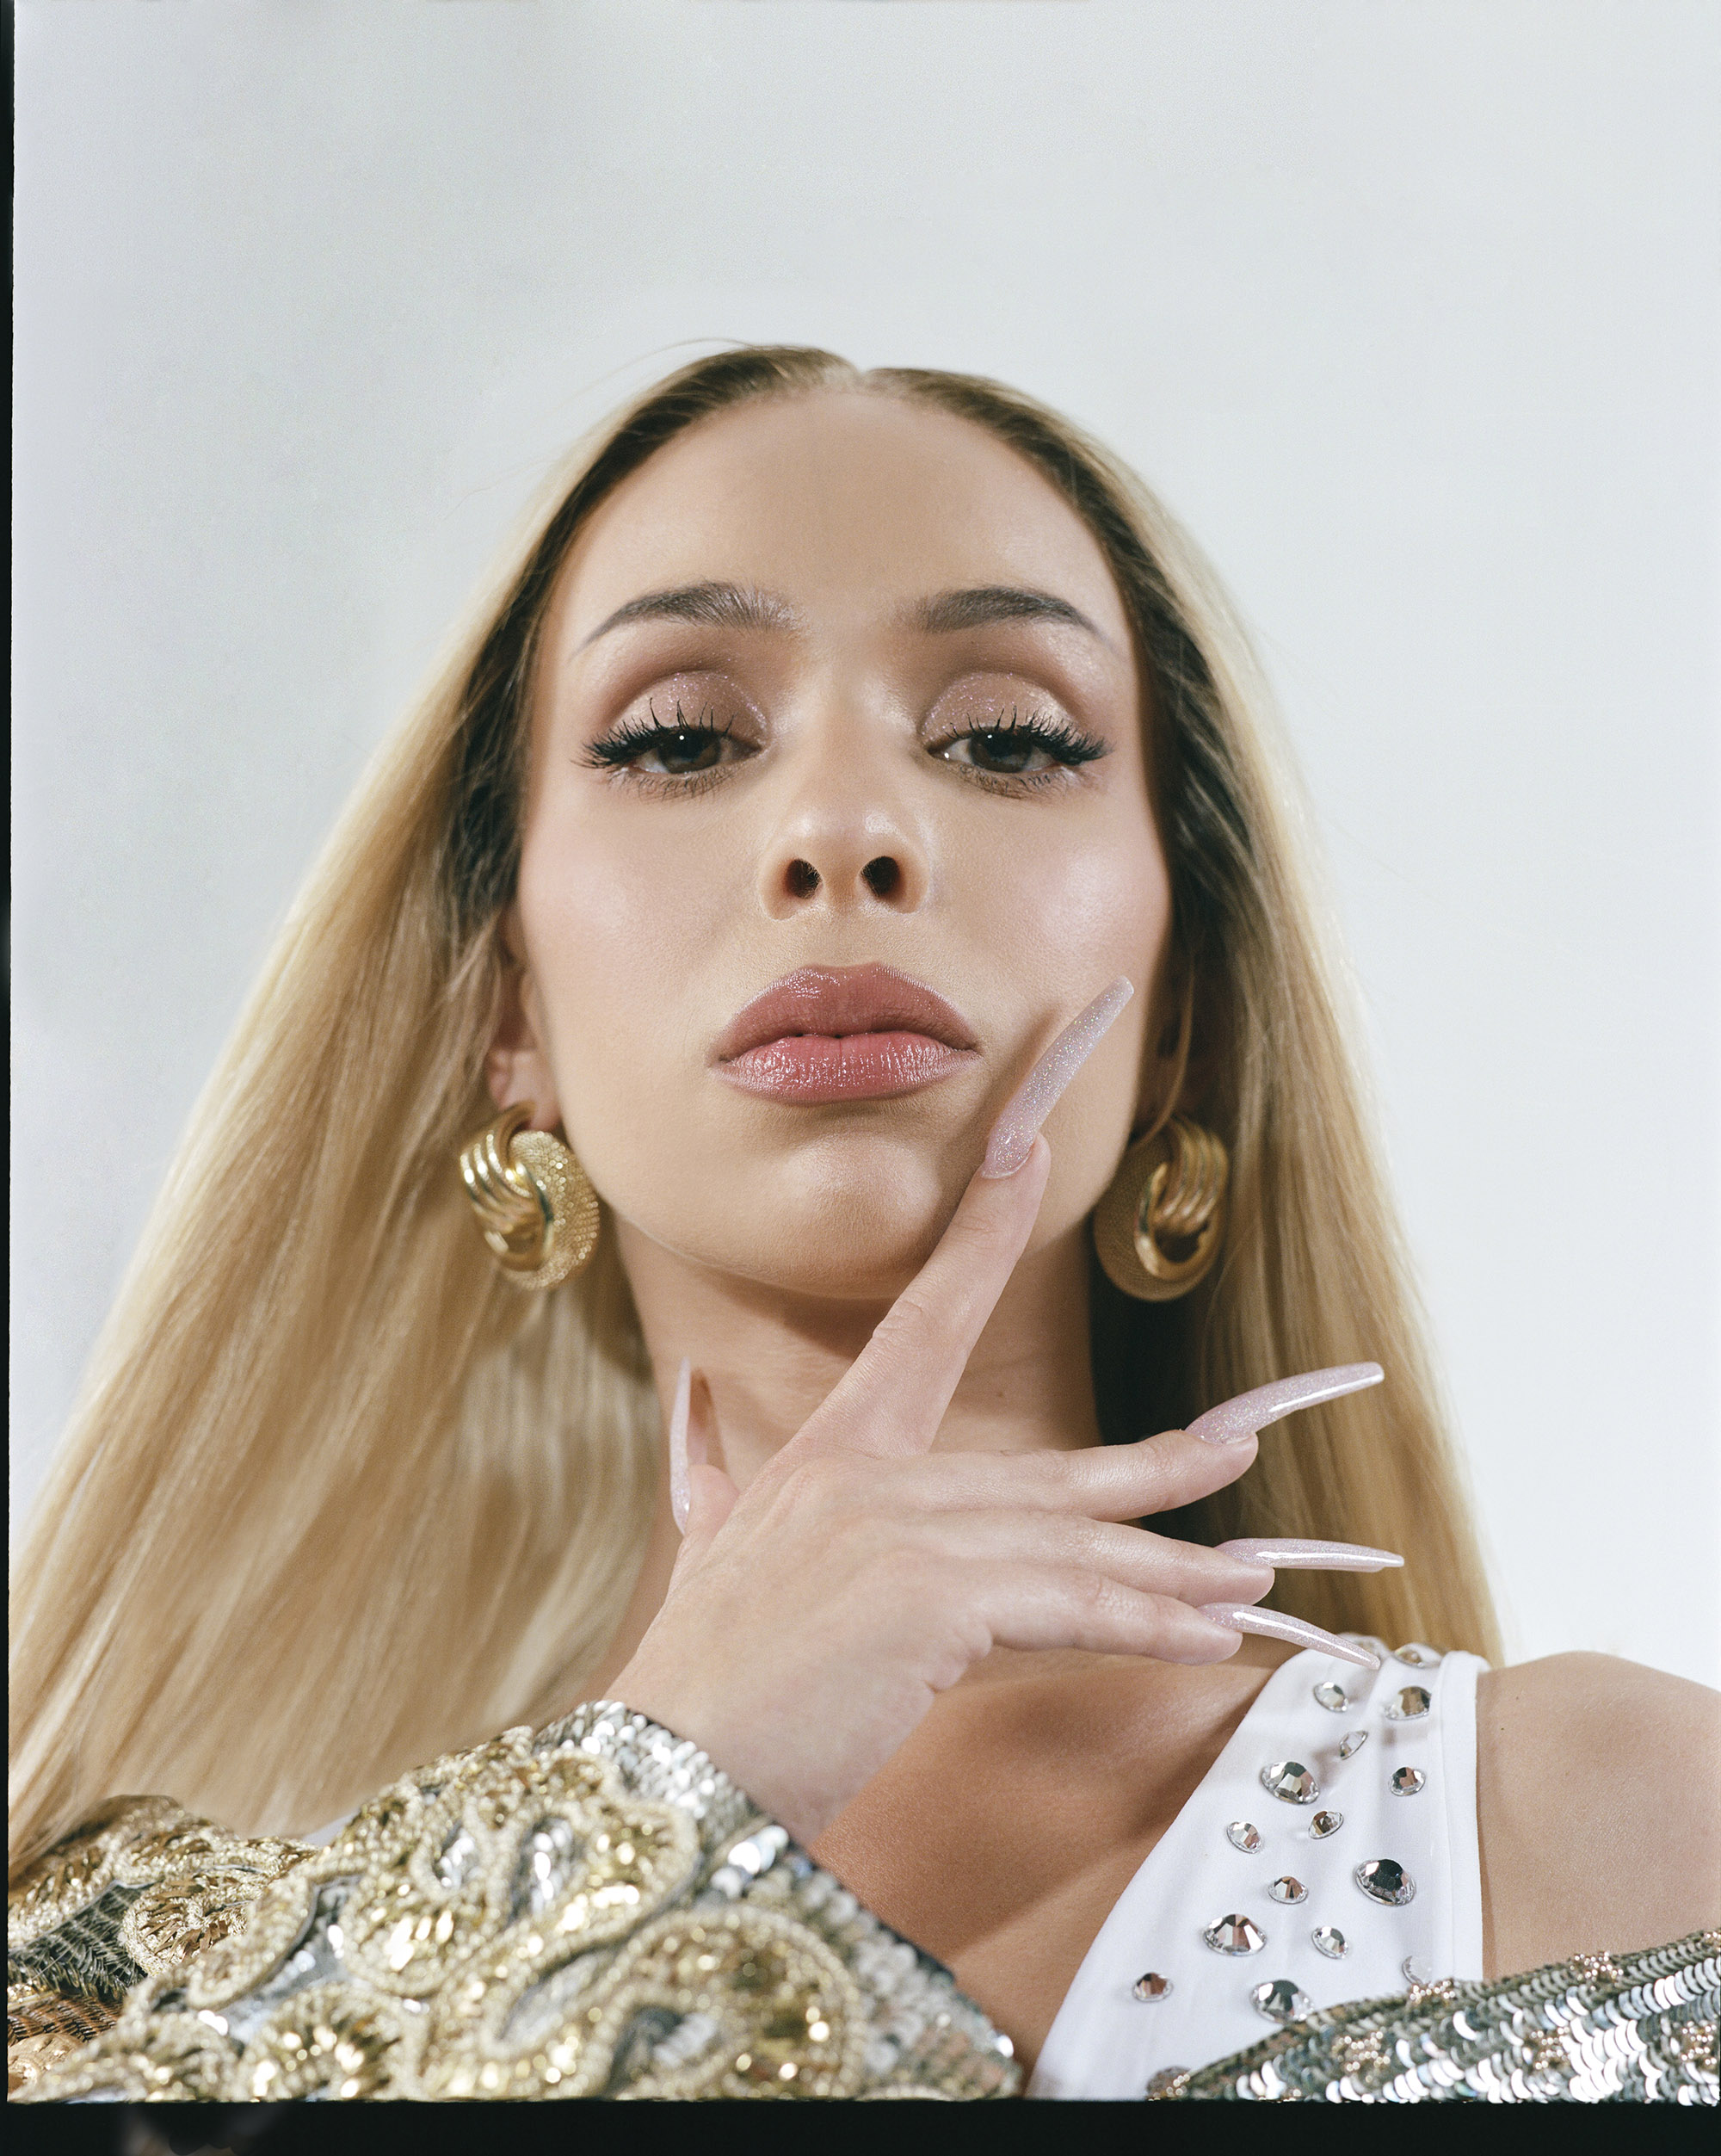 Trap music: Bad Gyal: 'There's no need to go telling people what you think  of their body' | Culture | EL PAÍS English Edition